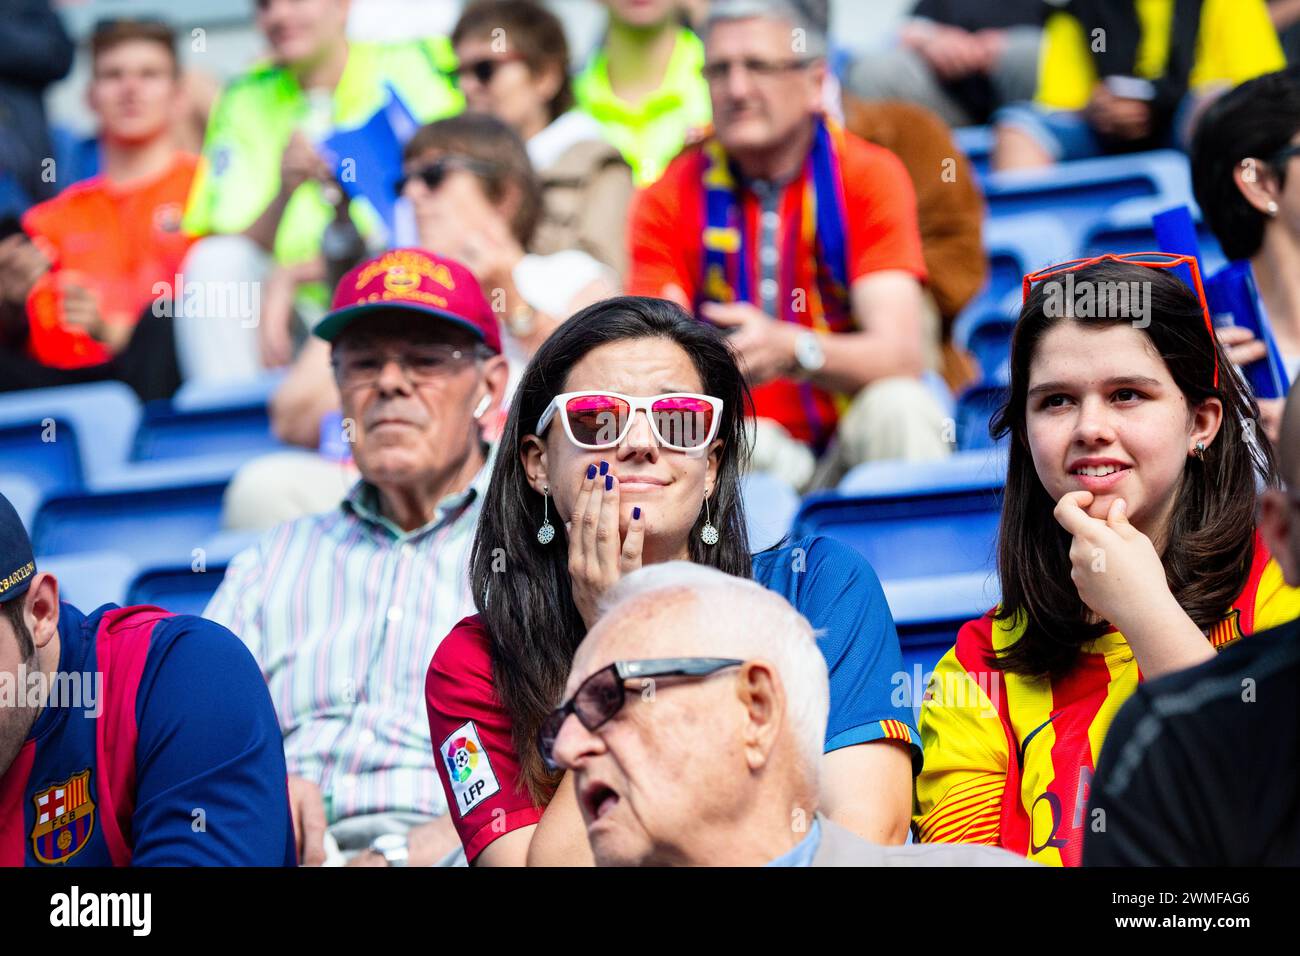 FANS, BARCELONA FC, 2015: Two young female fans in the crowd. Fans gather at Camp Nou before match. The final game of the La Liga 2014-15 season in Spain between Barcelona FC and Deportivo de La Coruna at Camp Nou, Barcelona on May 23 2015. The Game finished 2-2. Barcelona celebrated winning the championship title and legend Xavi's final home game. Deportiva got the point they needed to avoid relegation. Photograph: Rob Watkins Stock Photo